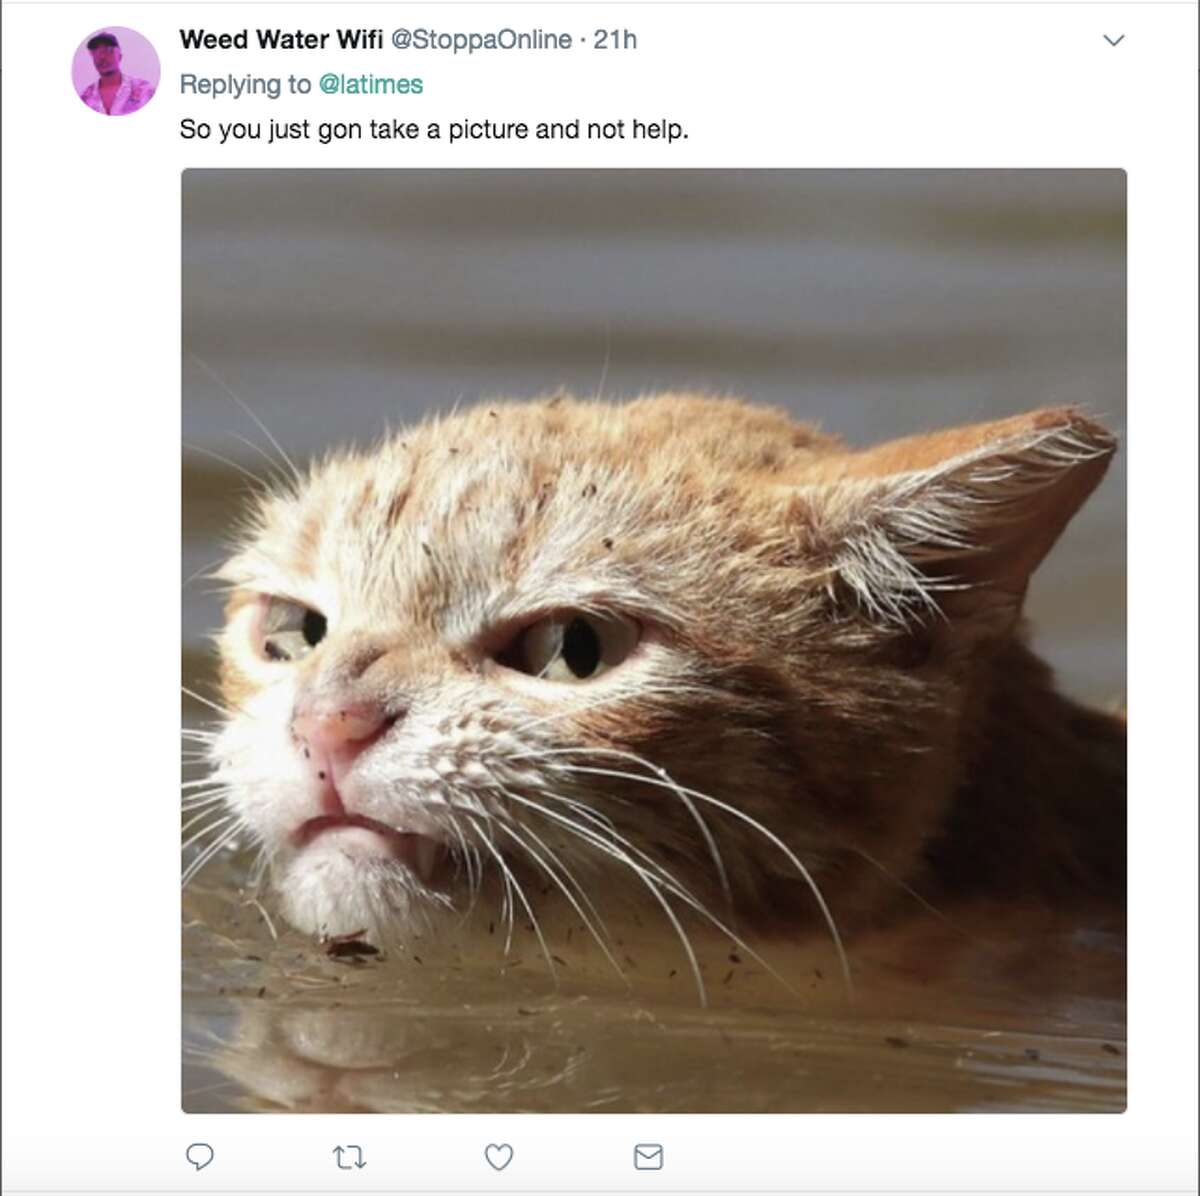 Photo of 'angry' cat in Harvey floodwaters sparks memes, controversy